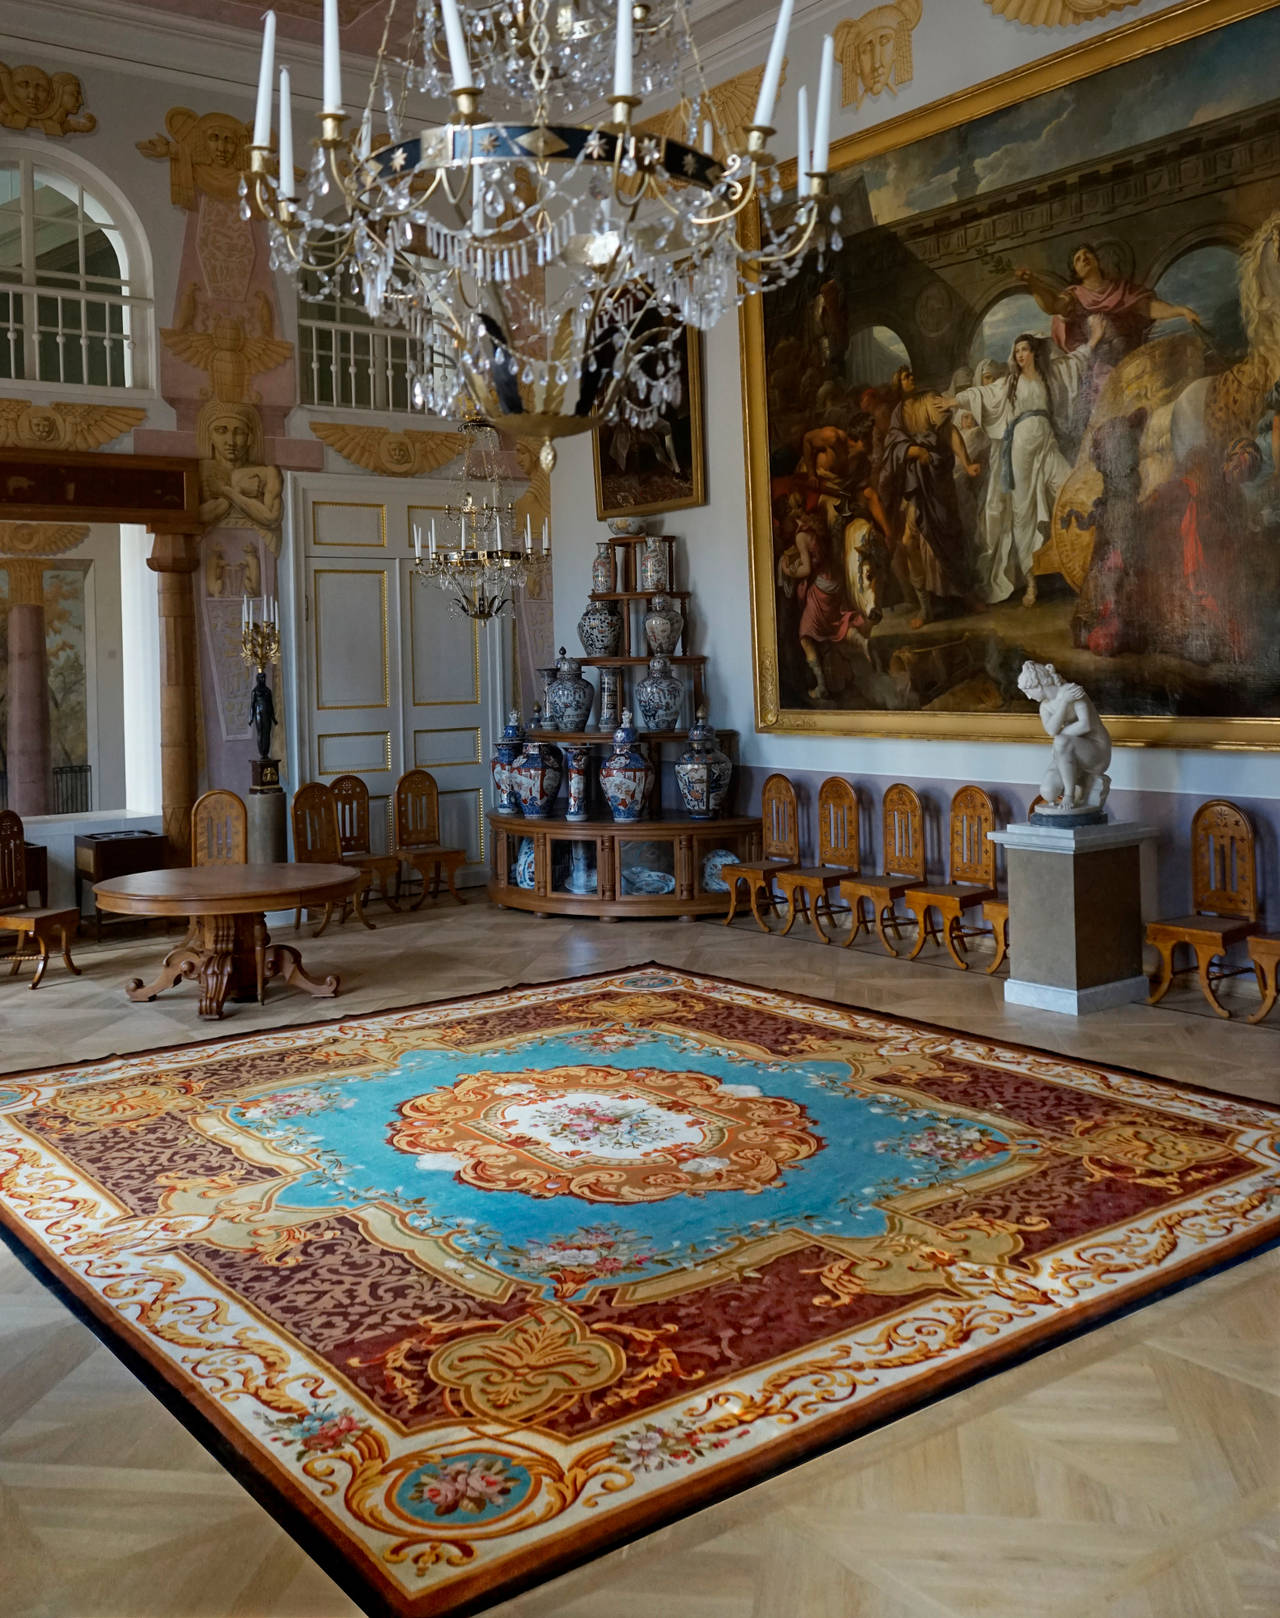 It is a rare Napoléon III Aubusson rug from the 19th Century in perfect conditions. 

Dimensions: 500 x 440 cm.
Composition: Wool
Manufacture Royale - Aubusson 
Hand-knotted
19th Century

Provenance: Aristocratic family

Workshops to